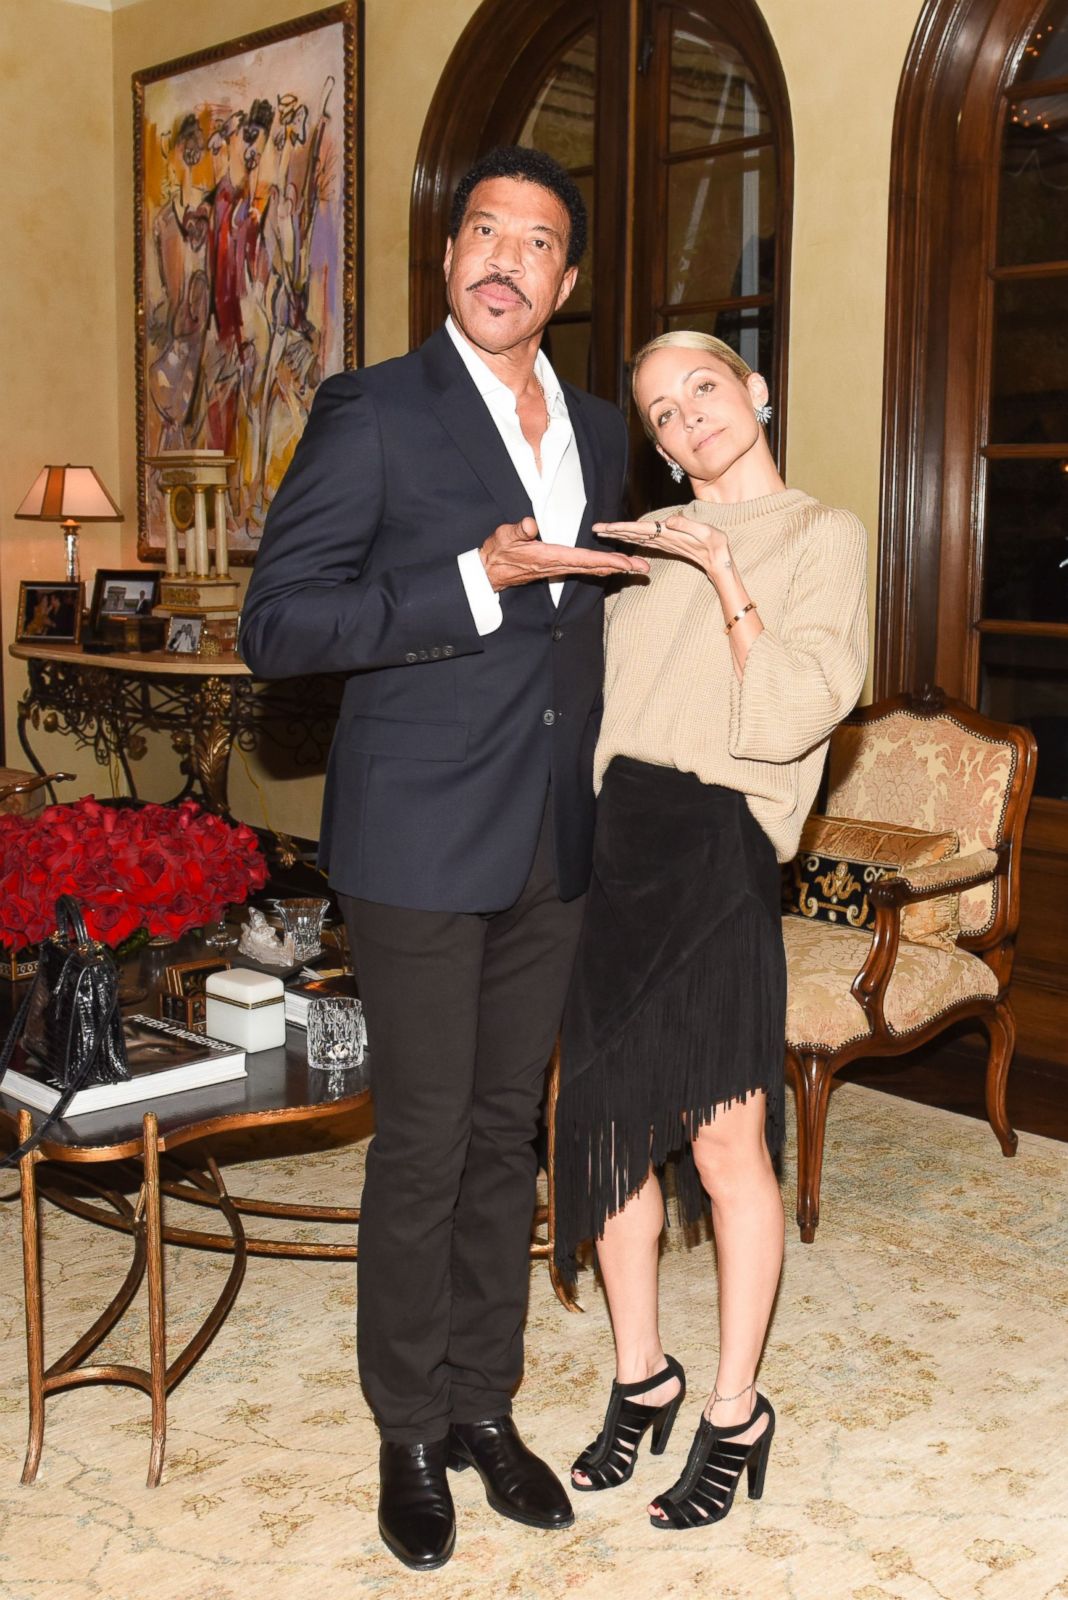 Lionel and Nicole Richie Pose at a Launch Party Picture | Stars with their families ...1068 x 1600